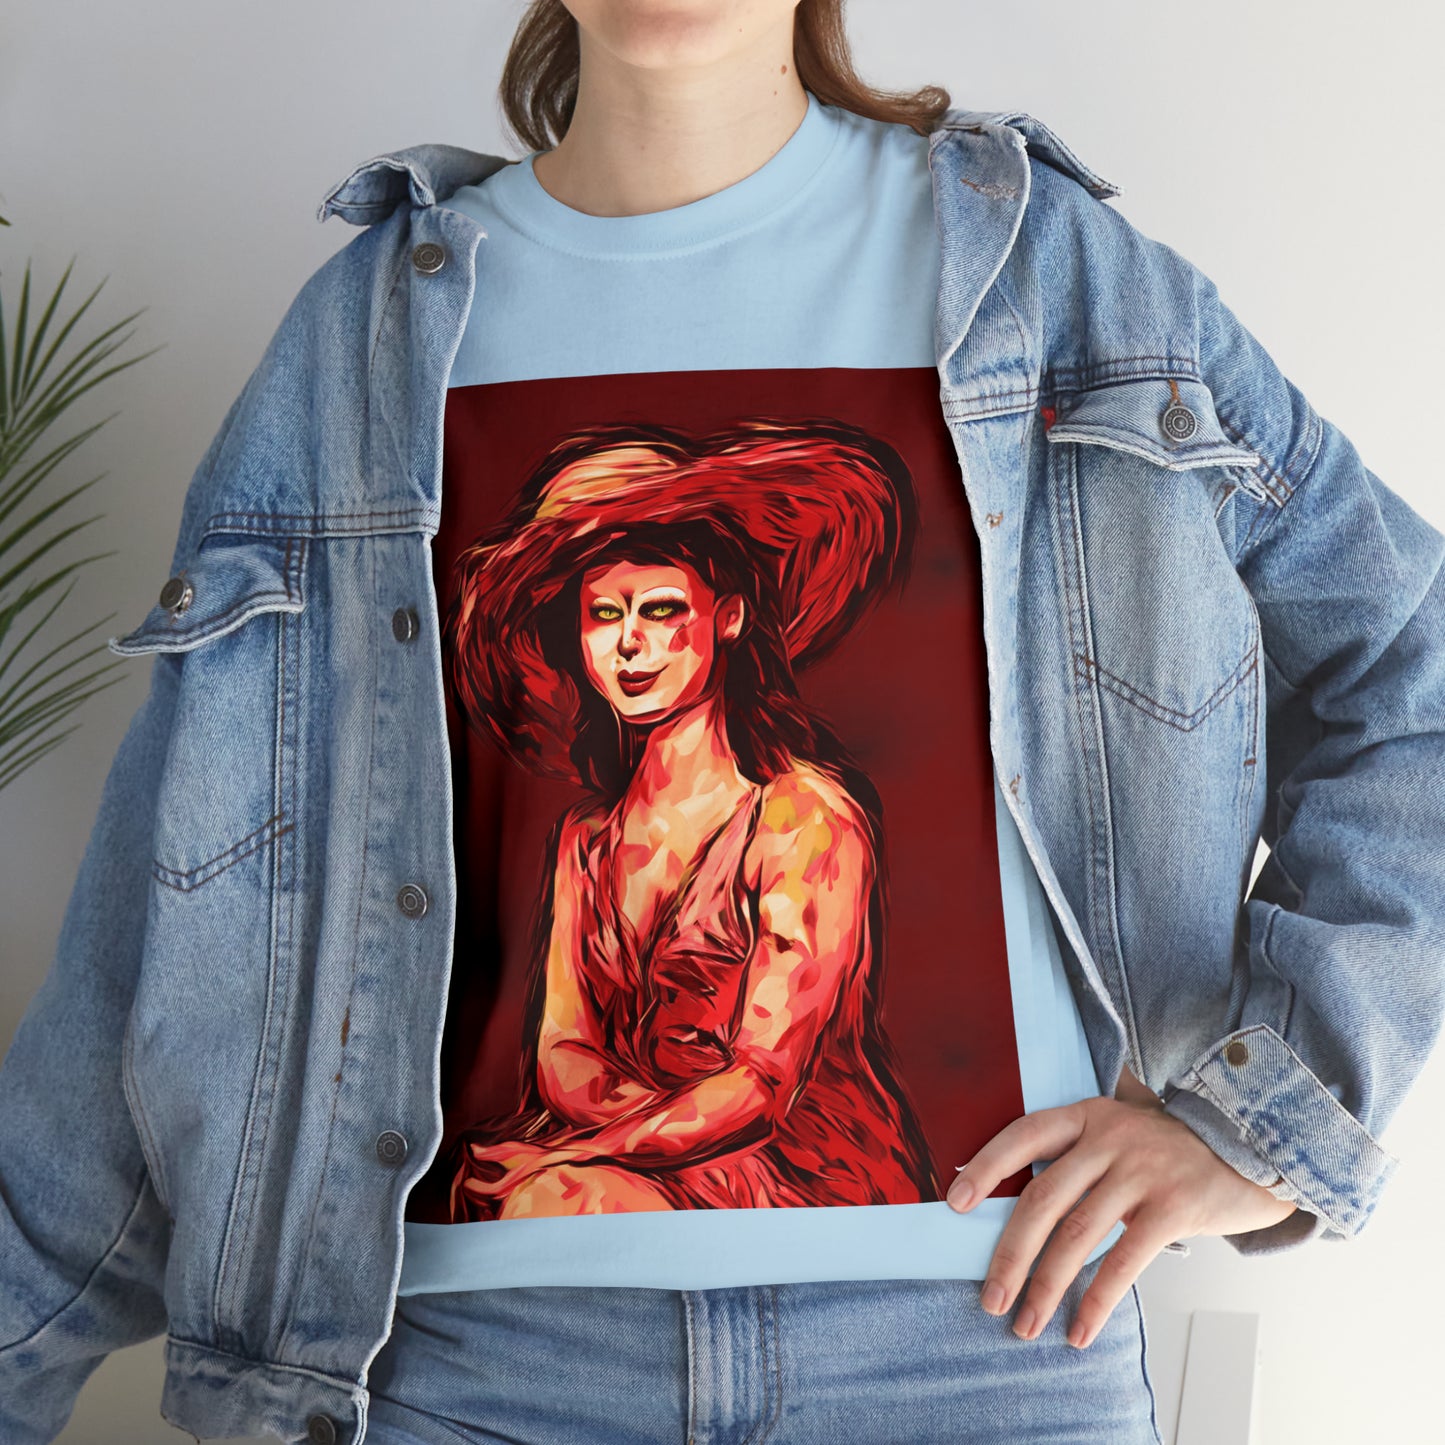 LADY IN SUN HAT (Red) - Airt on a Shirt  - Unisex Heavy Cotton Tee - AUS